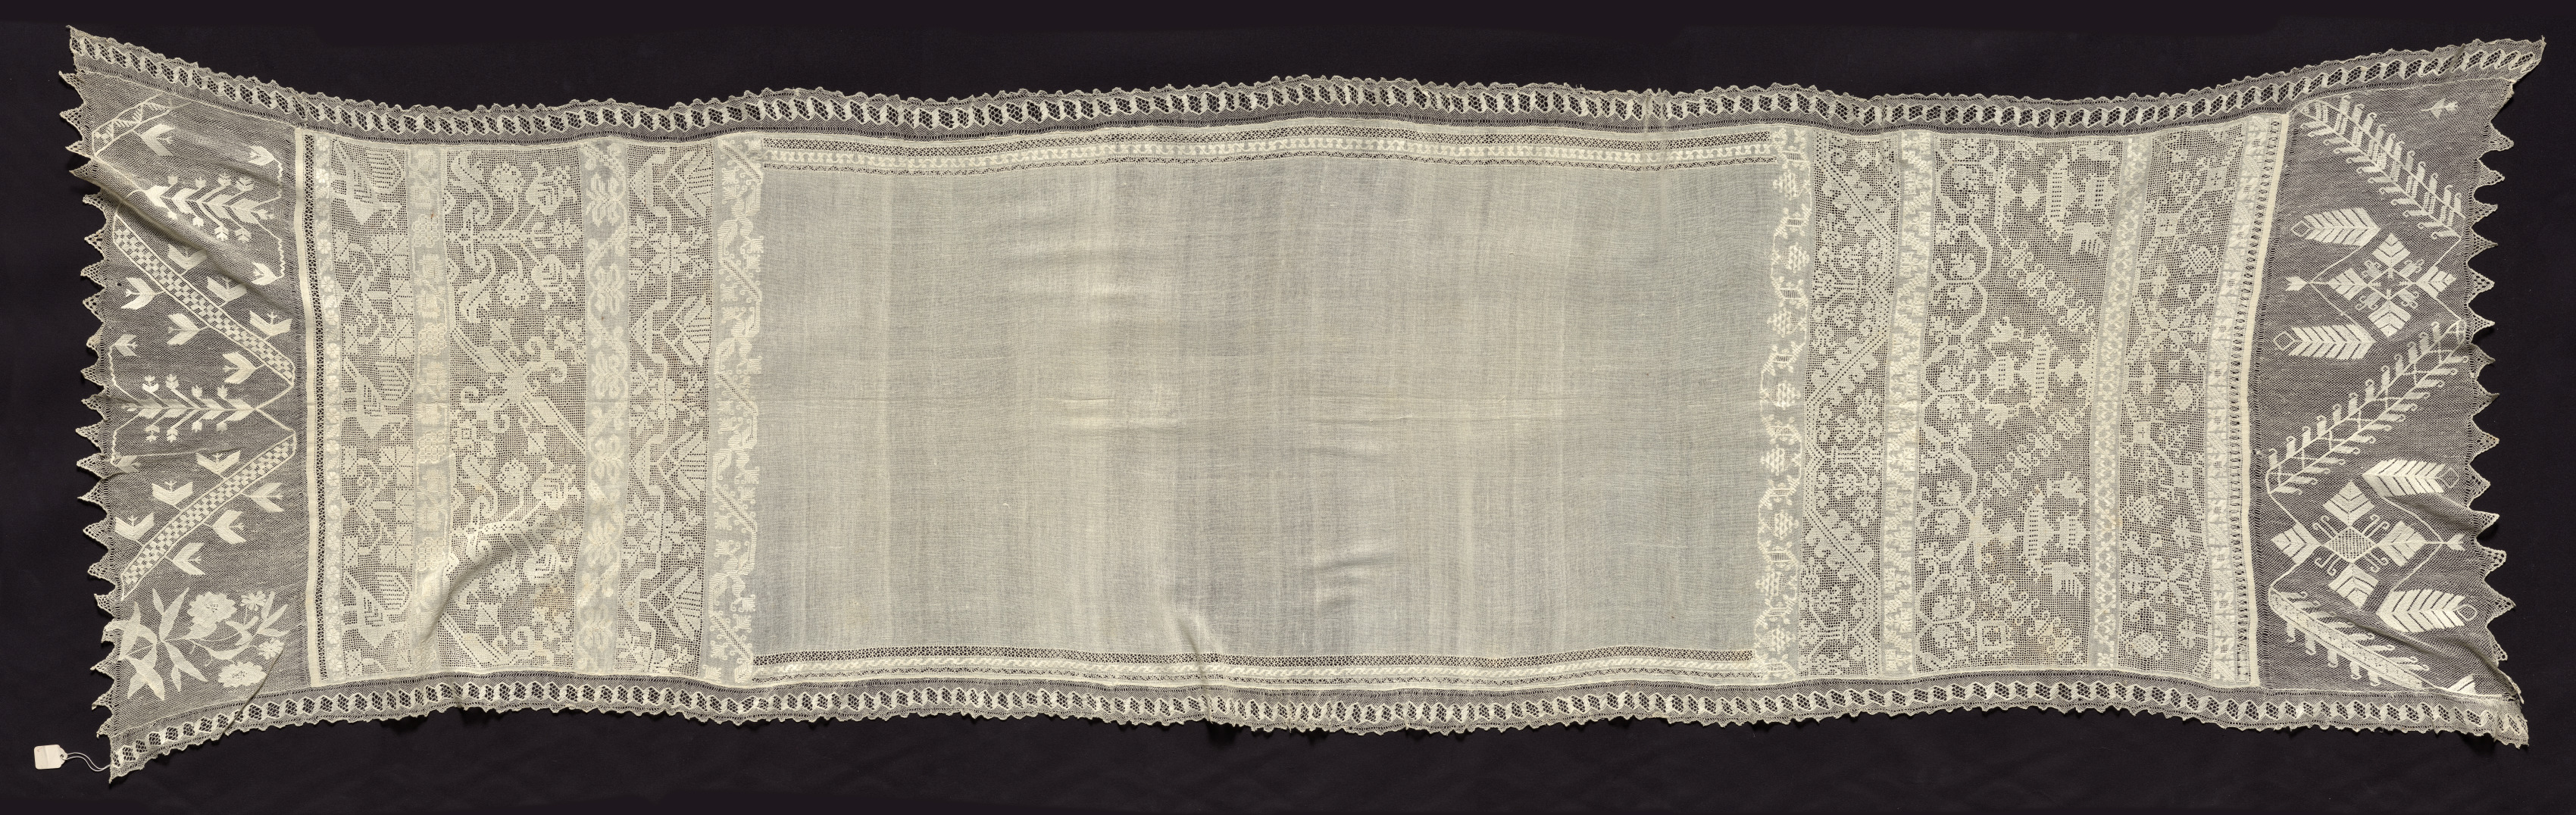 Cloth with Border of Vegetal Motifs and Insertion with Bird Motifs